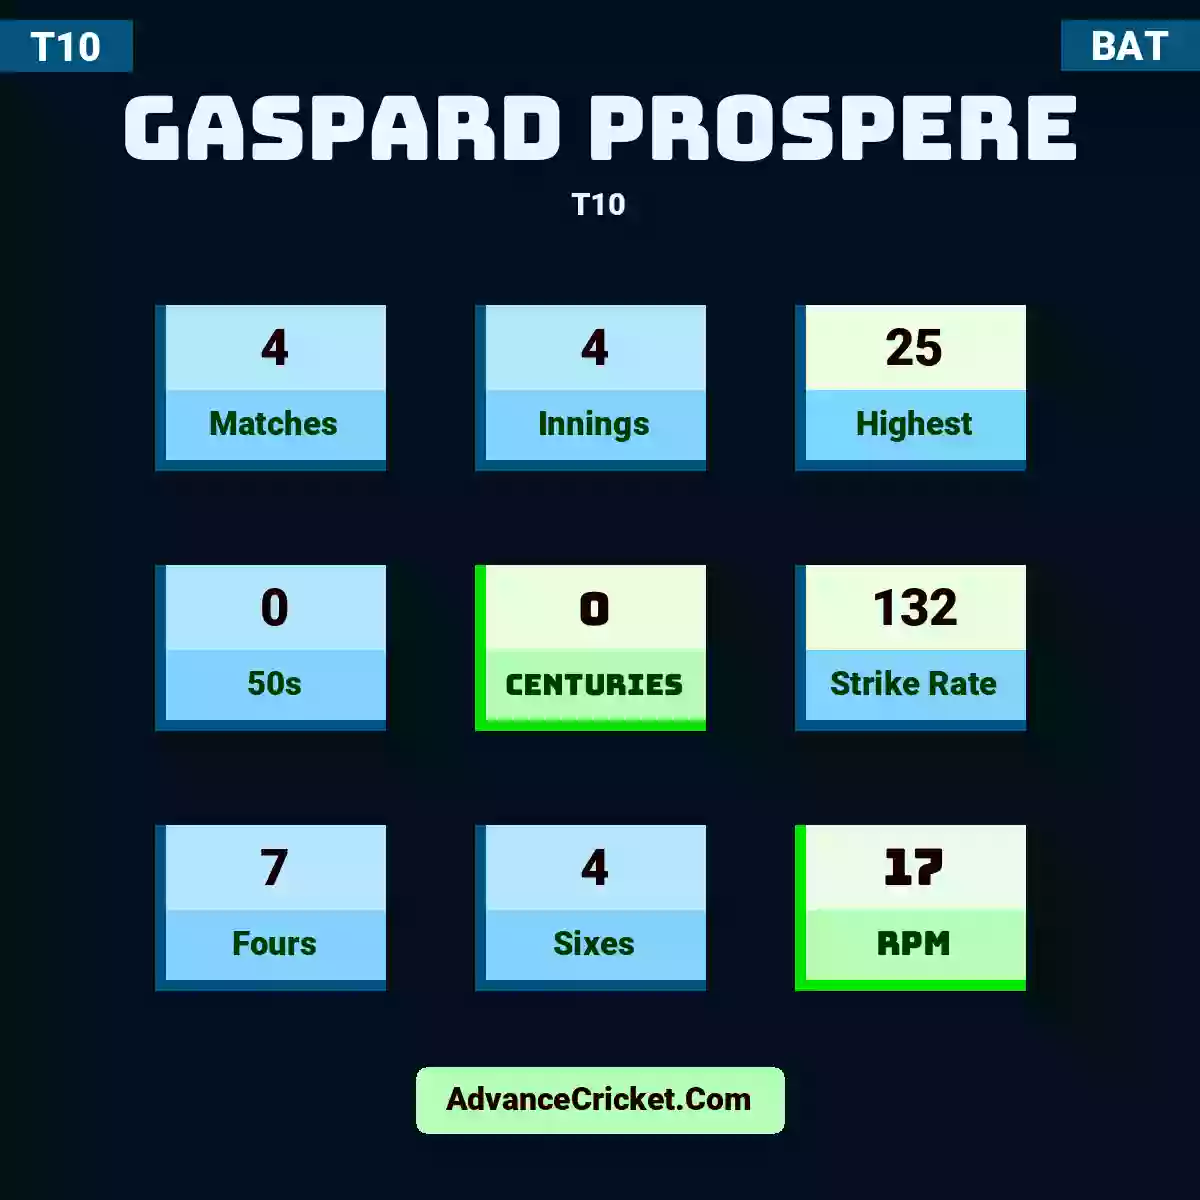 Gaspard Prospere T10 , Gaspard Prospere played 4 matches, scored 25 runs as highest, 0 half-centuries, and 0 centuries, with a strike rate of 132. G.Prospere hit 7 fours and 4 sixes, with an RPM of 17.